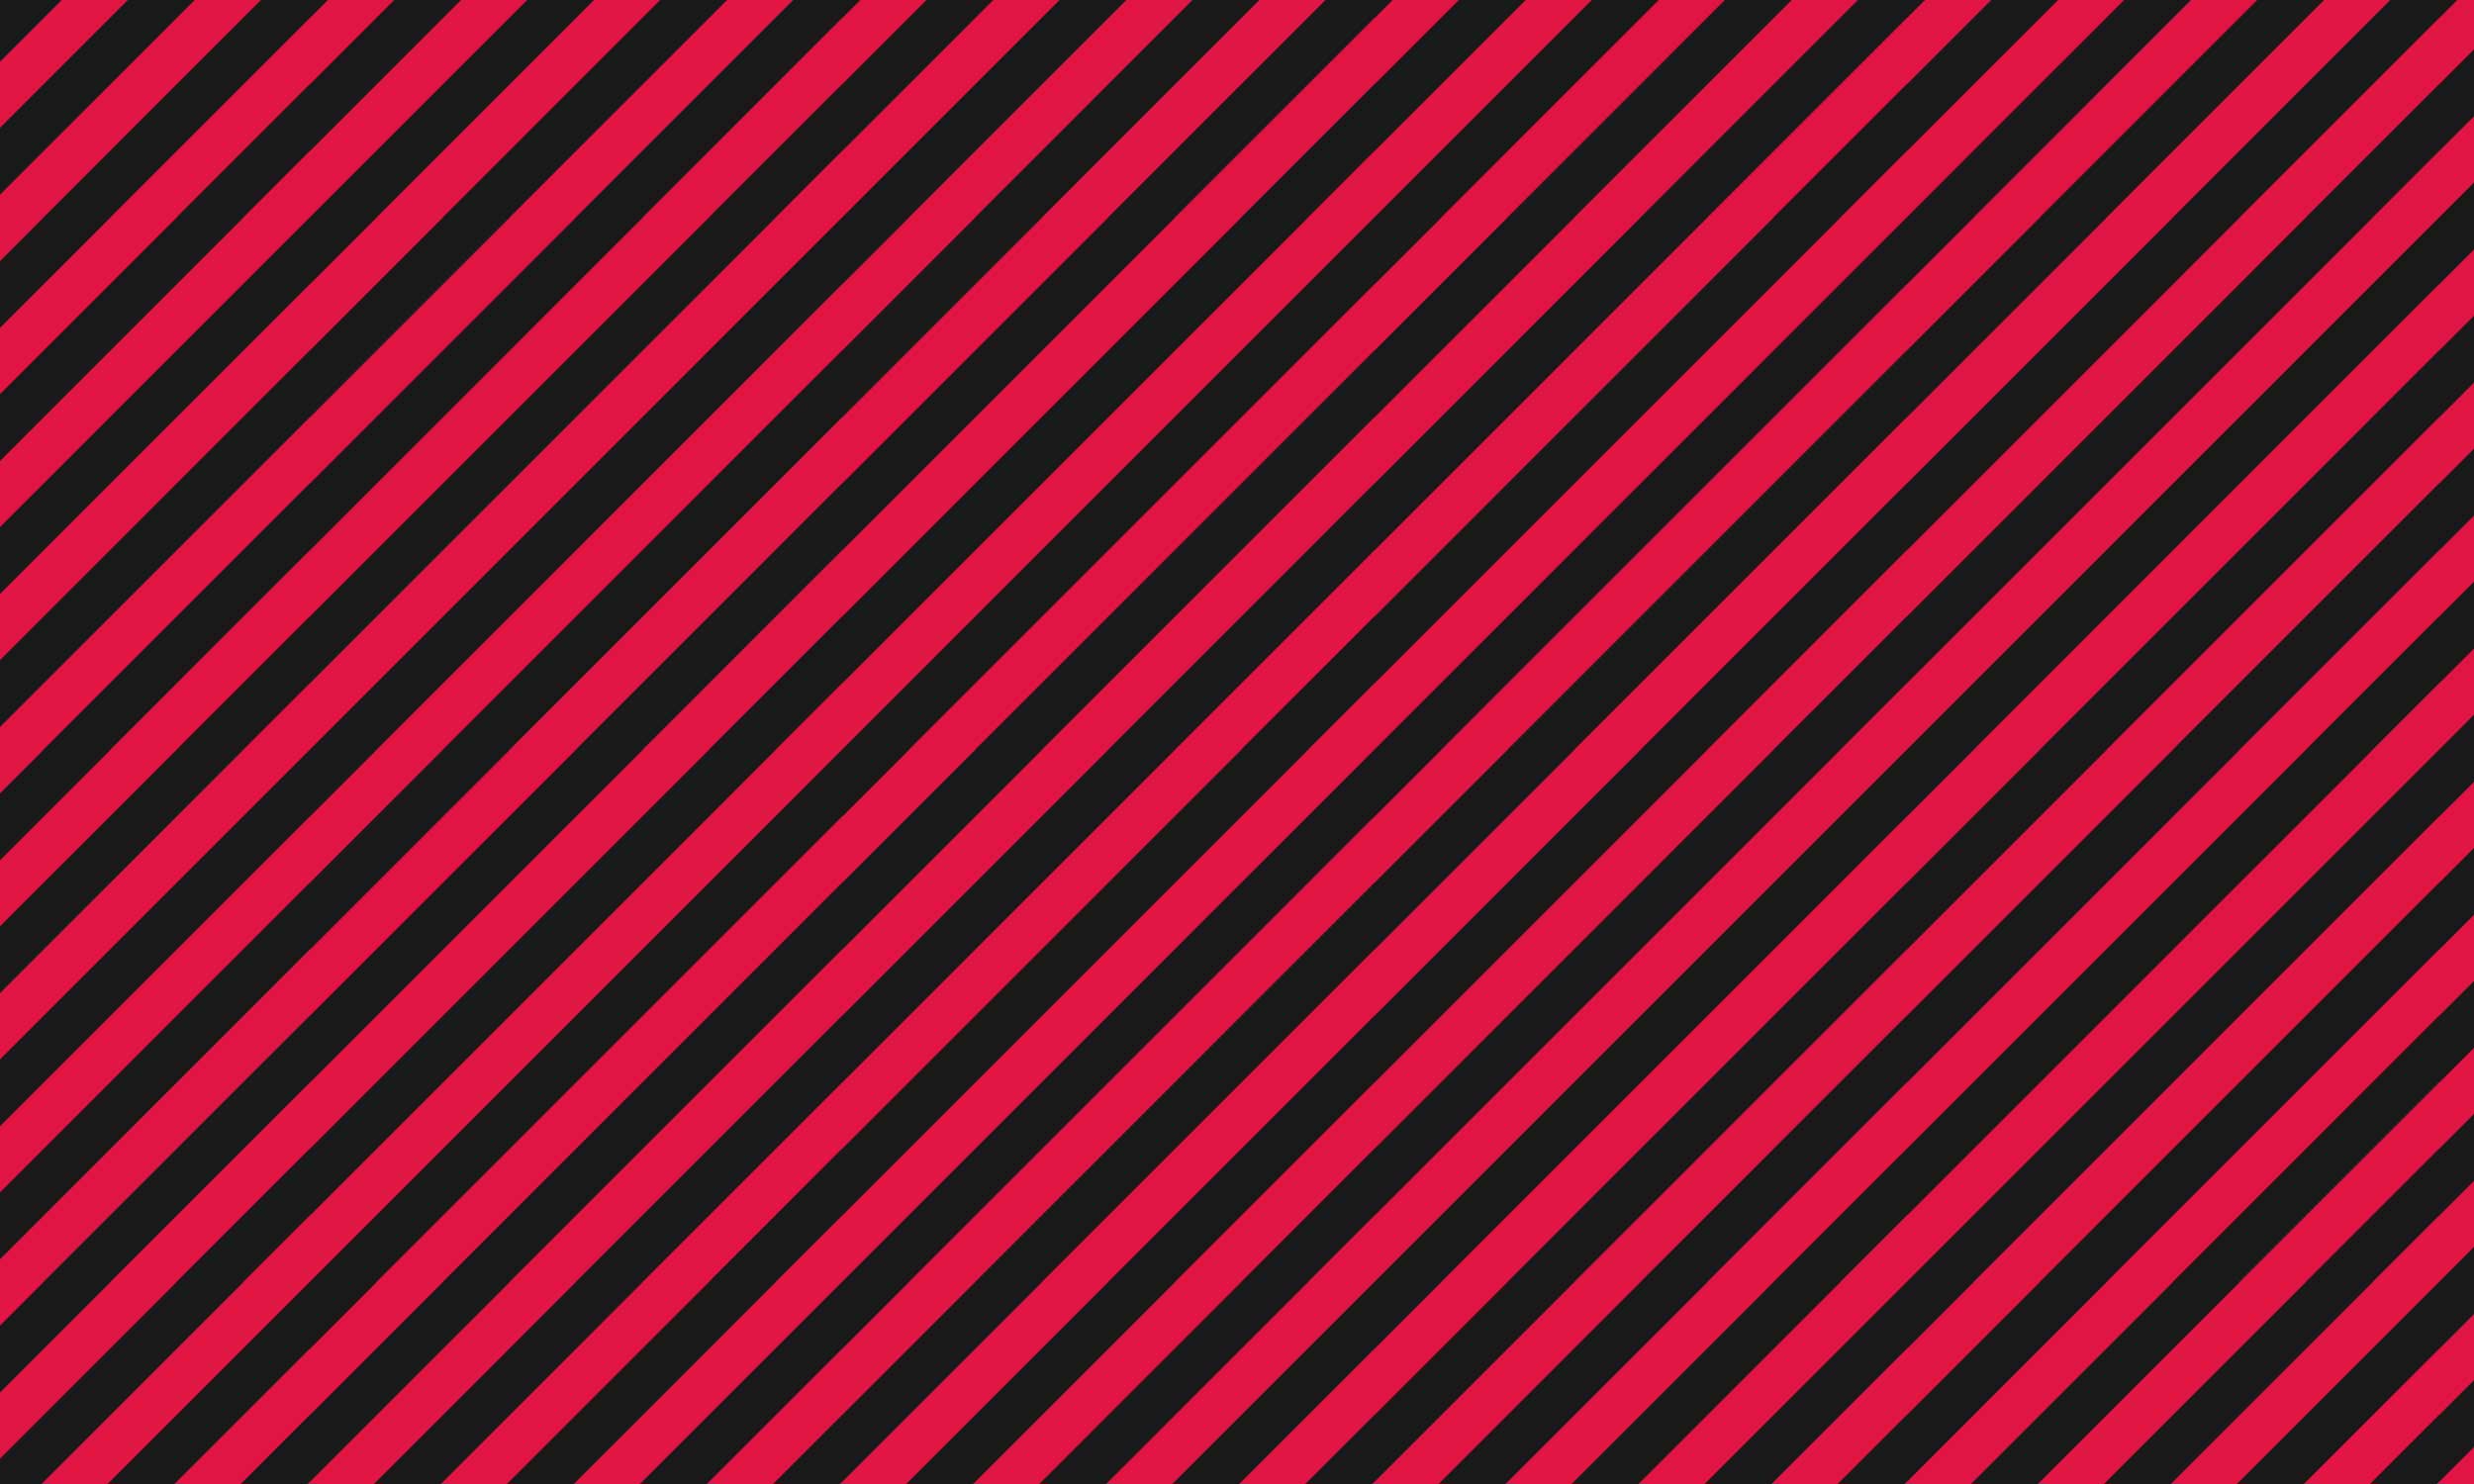 Red and black stripes